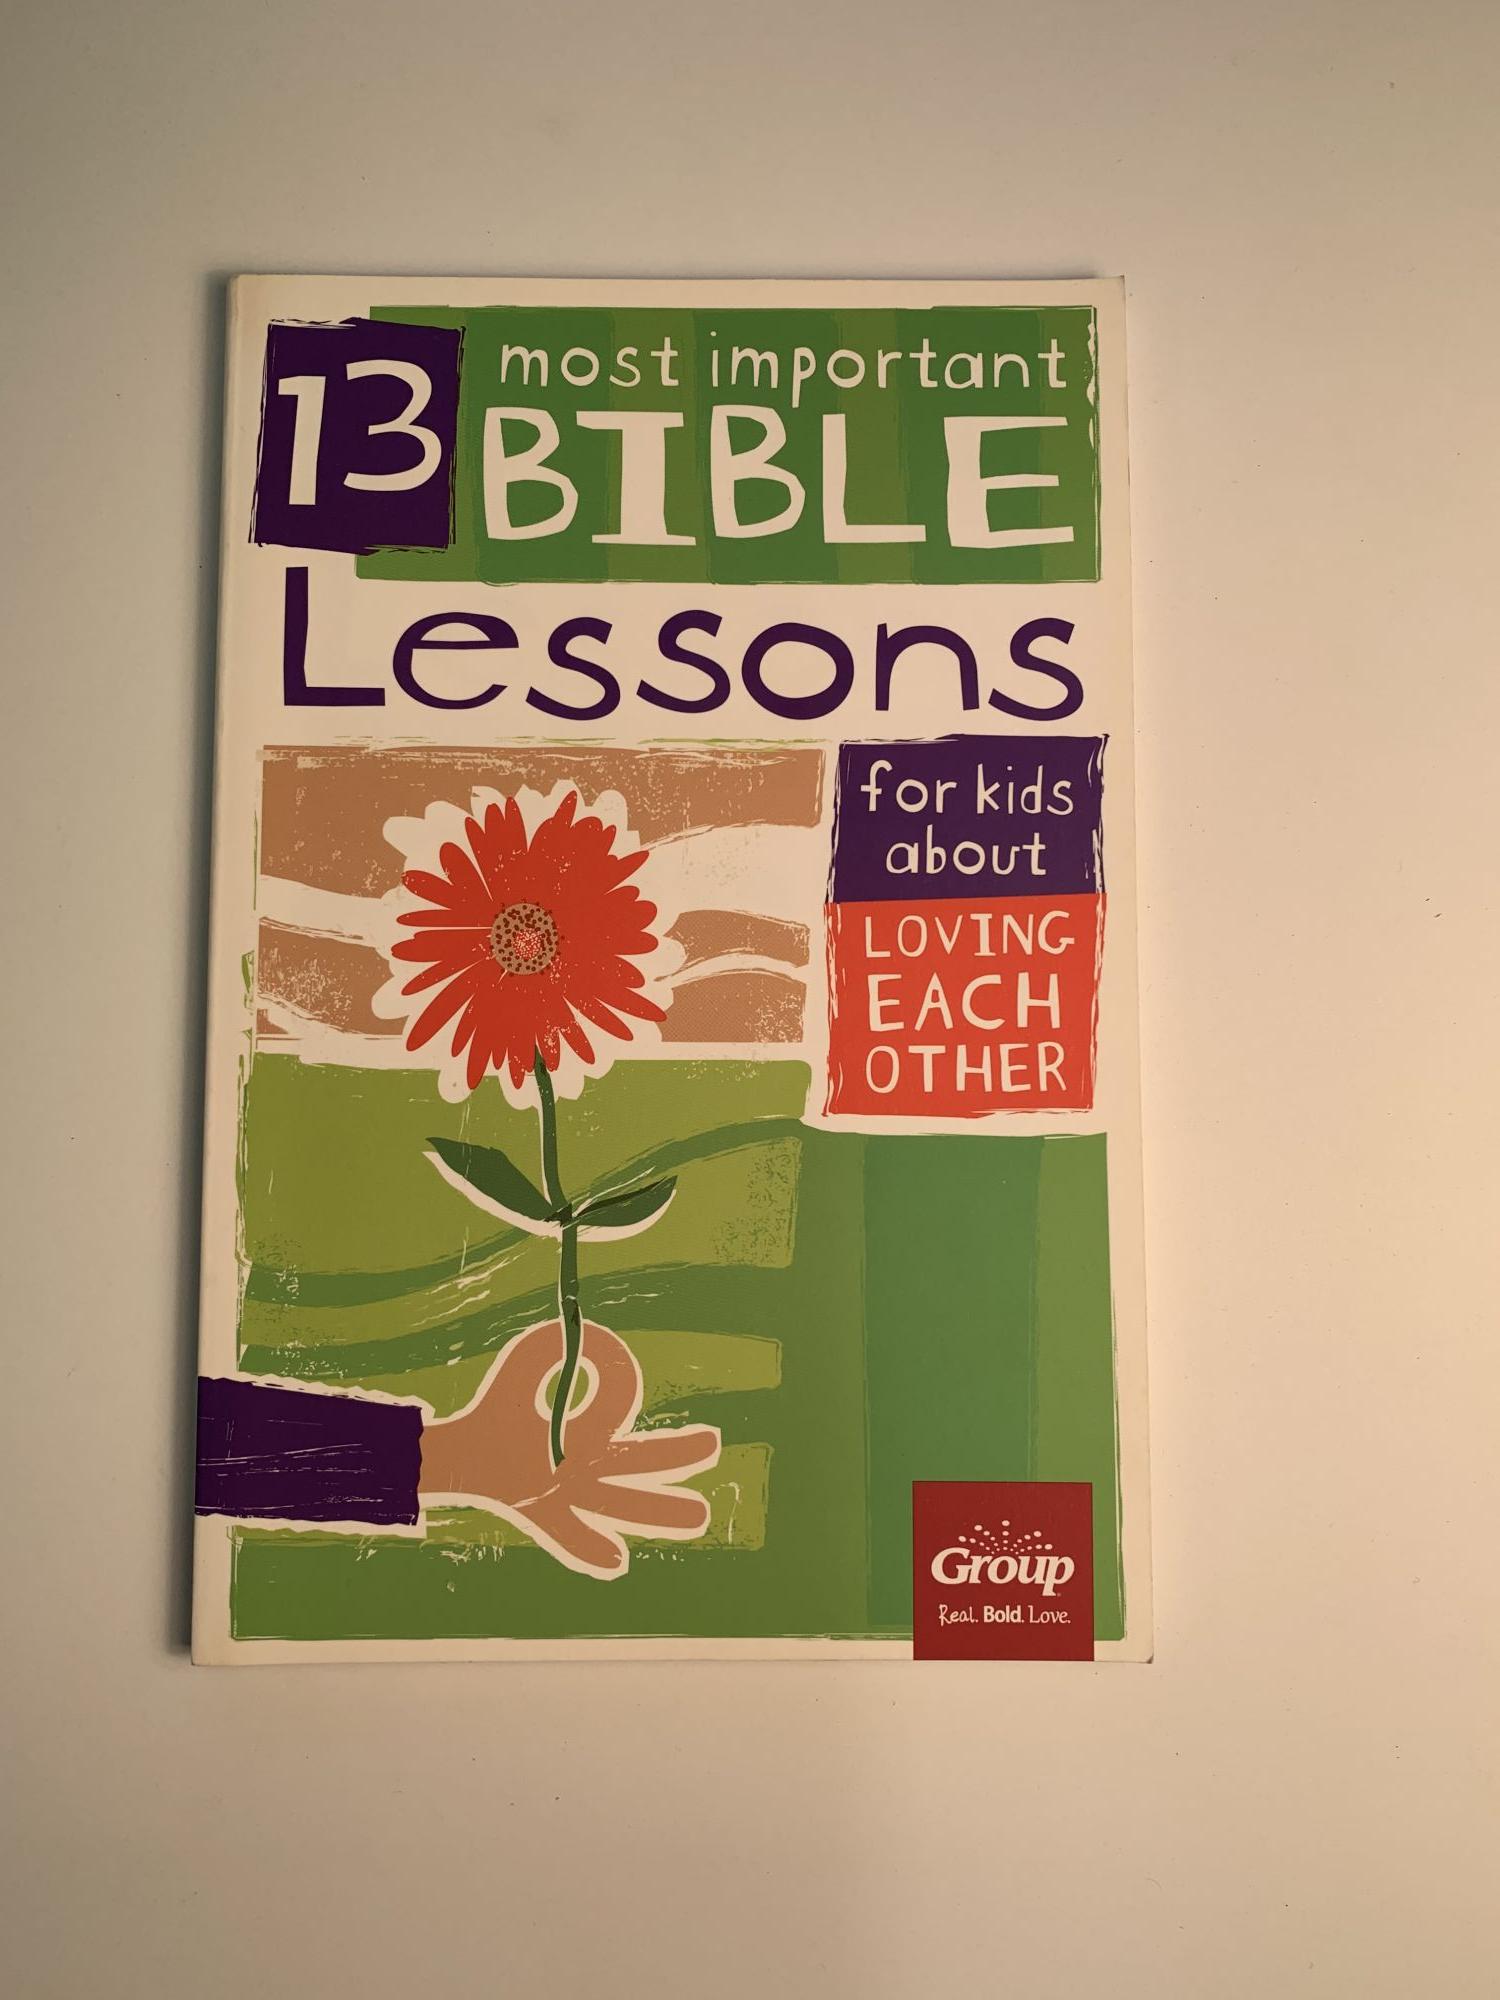 13-most-important-bible-lessons-for-kids-about-loving-each-other